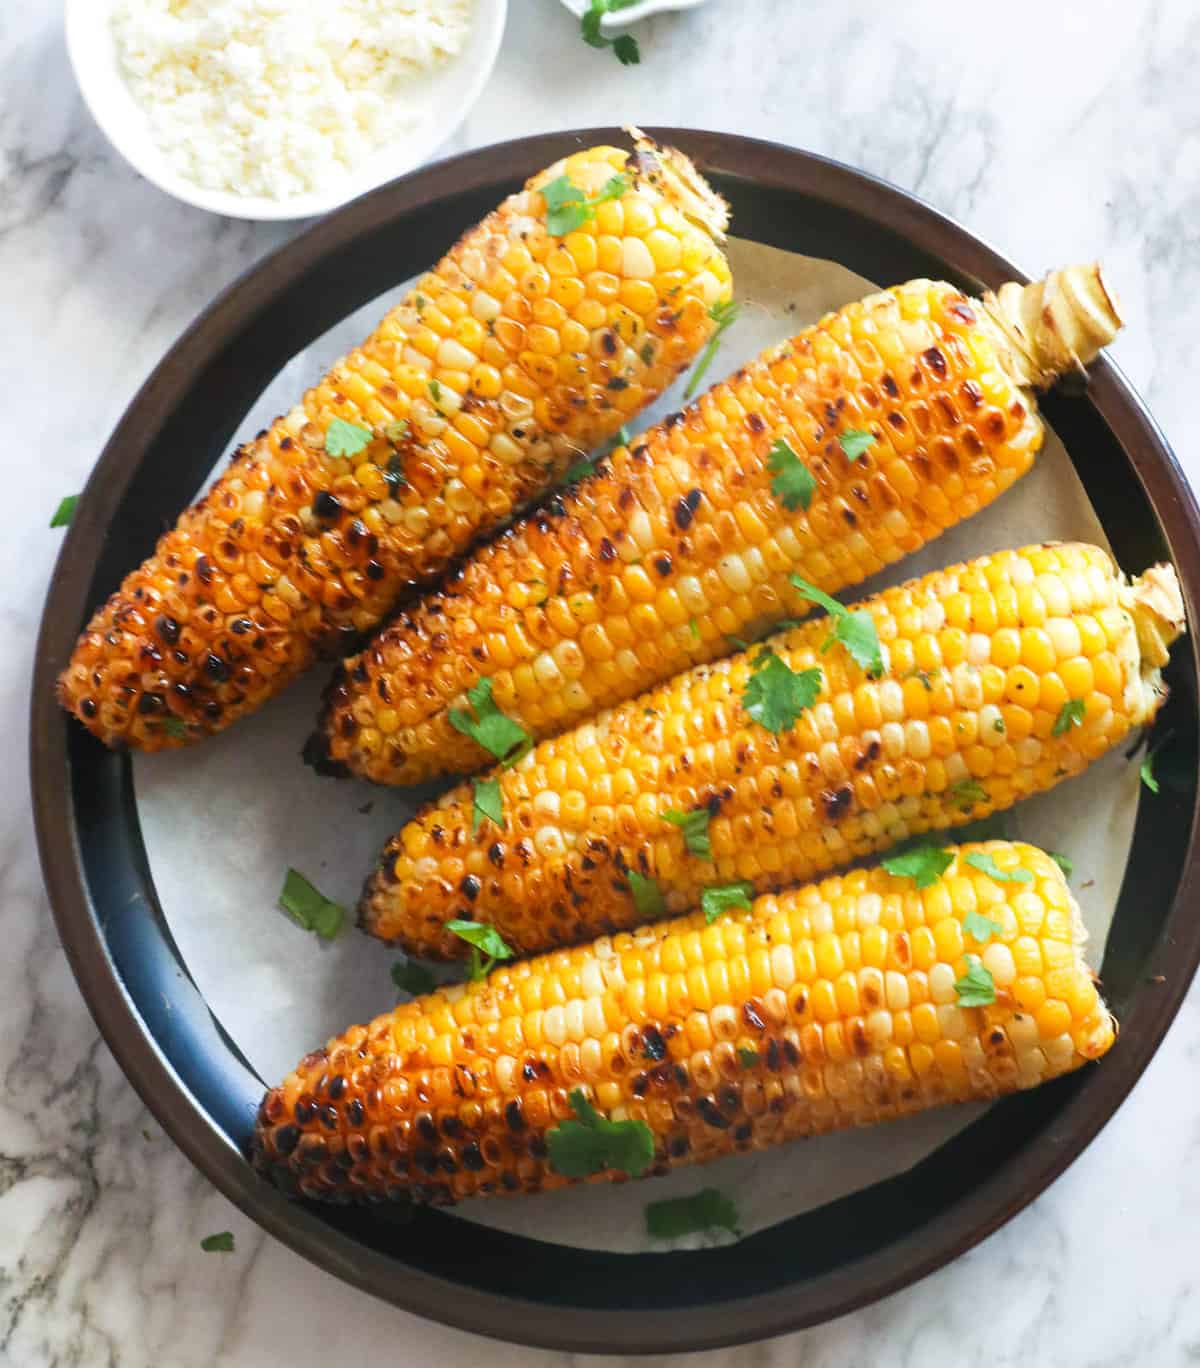 Grilled corn on a plate with cilantro on top and queso fresco on the side